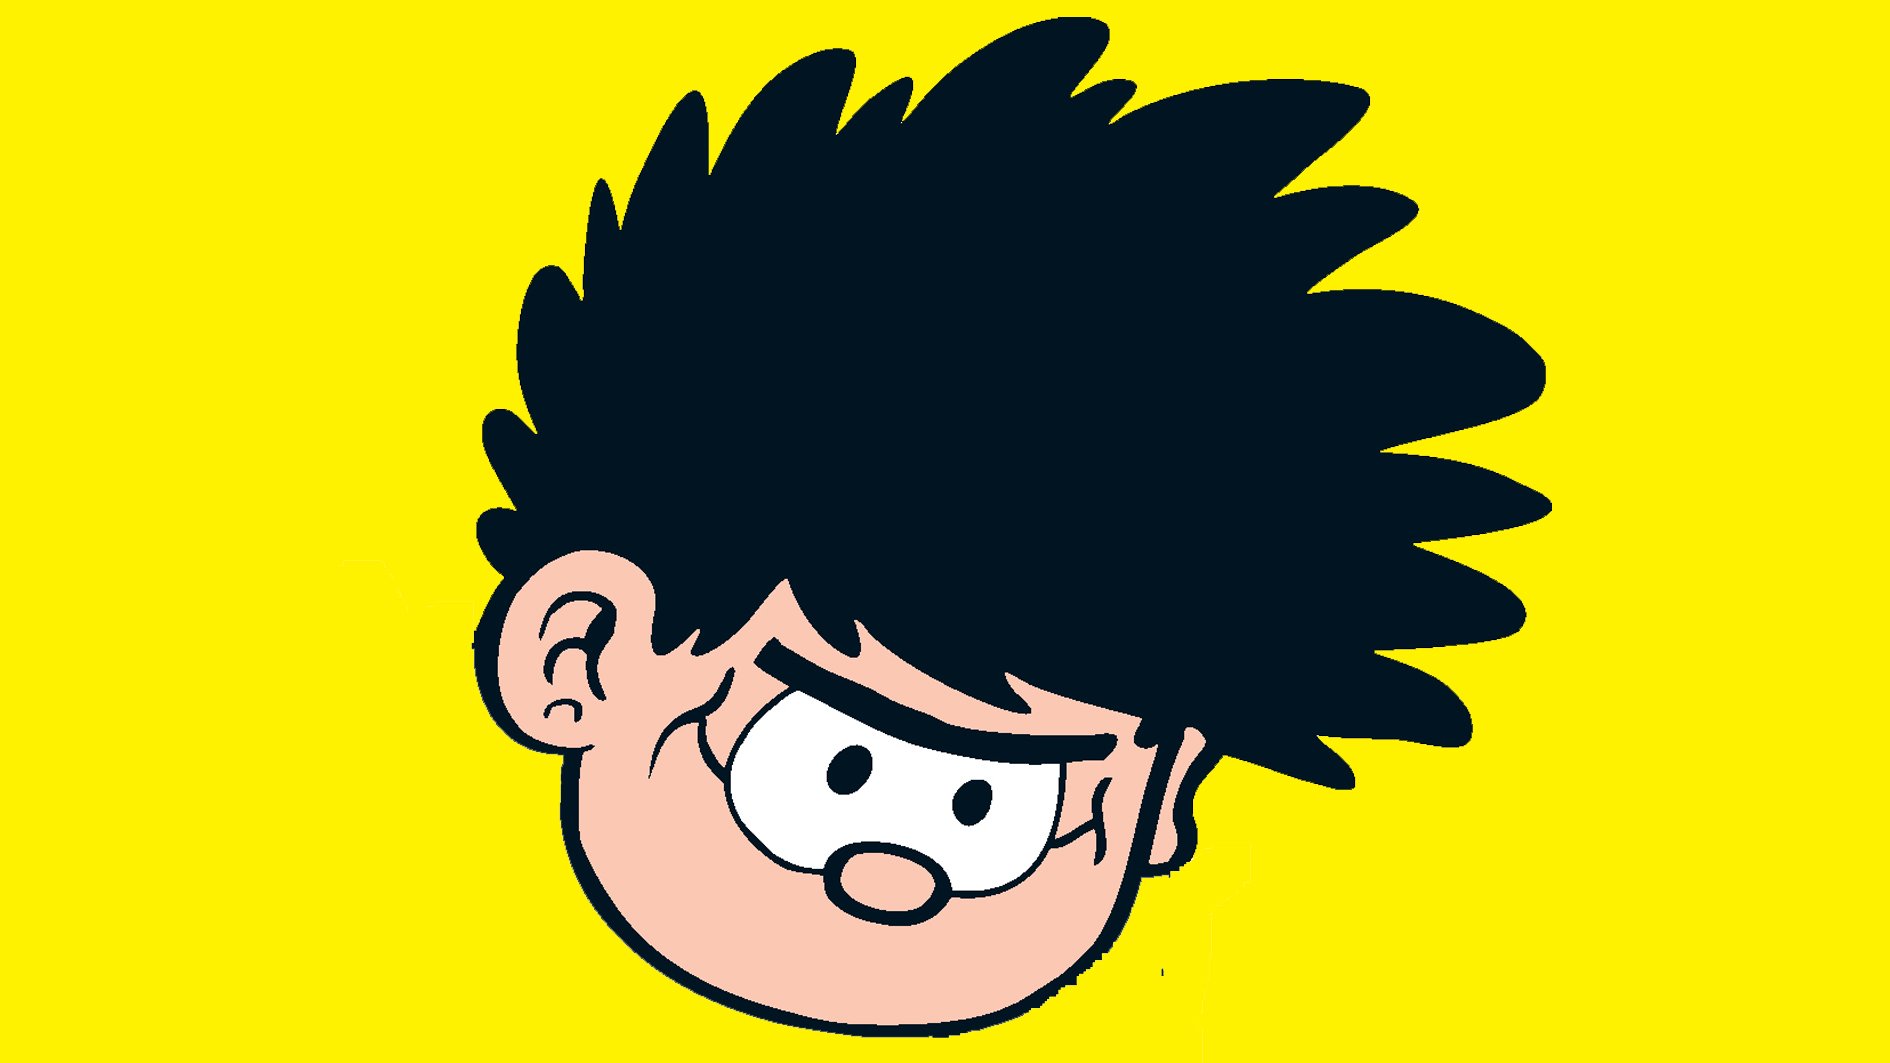 Dennis the Menace from the Beano